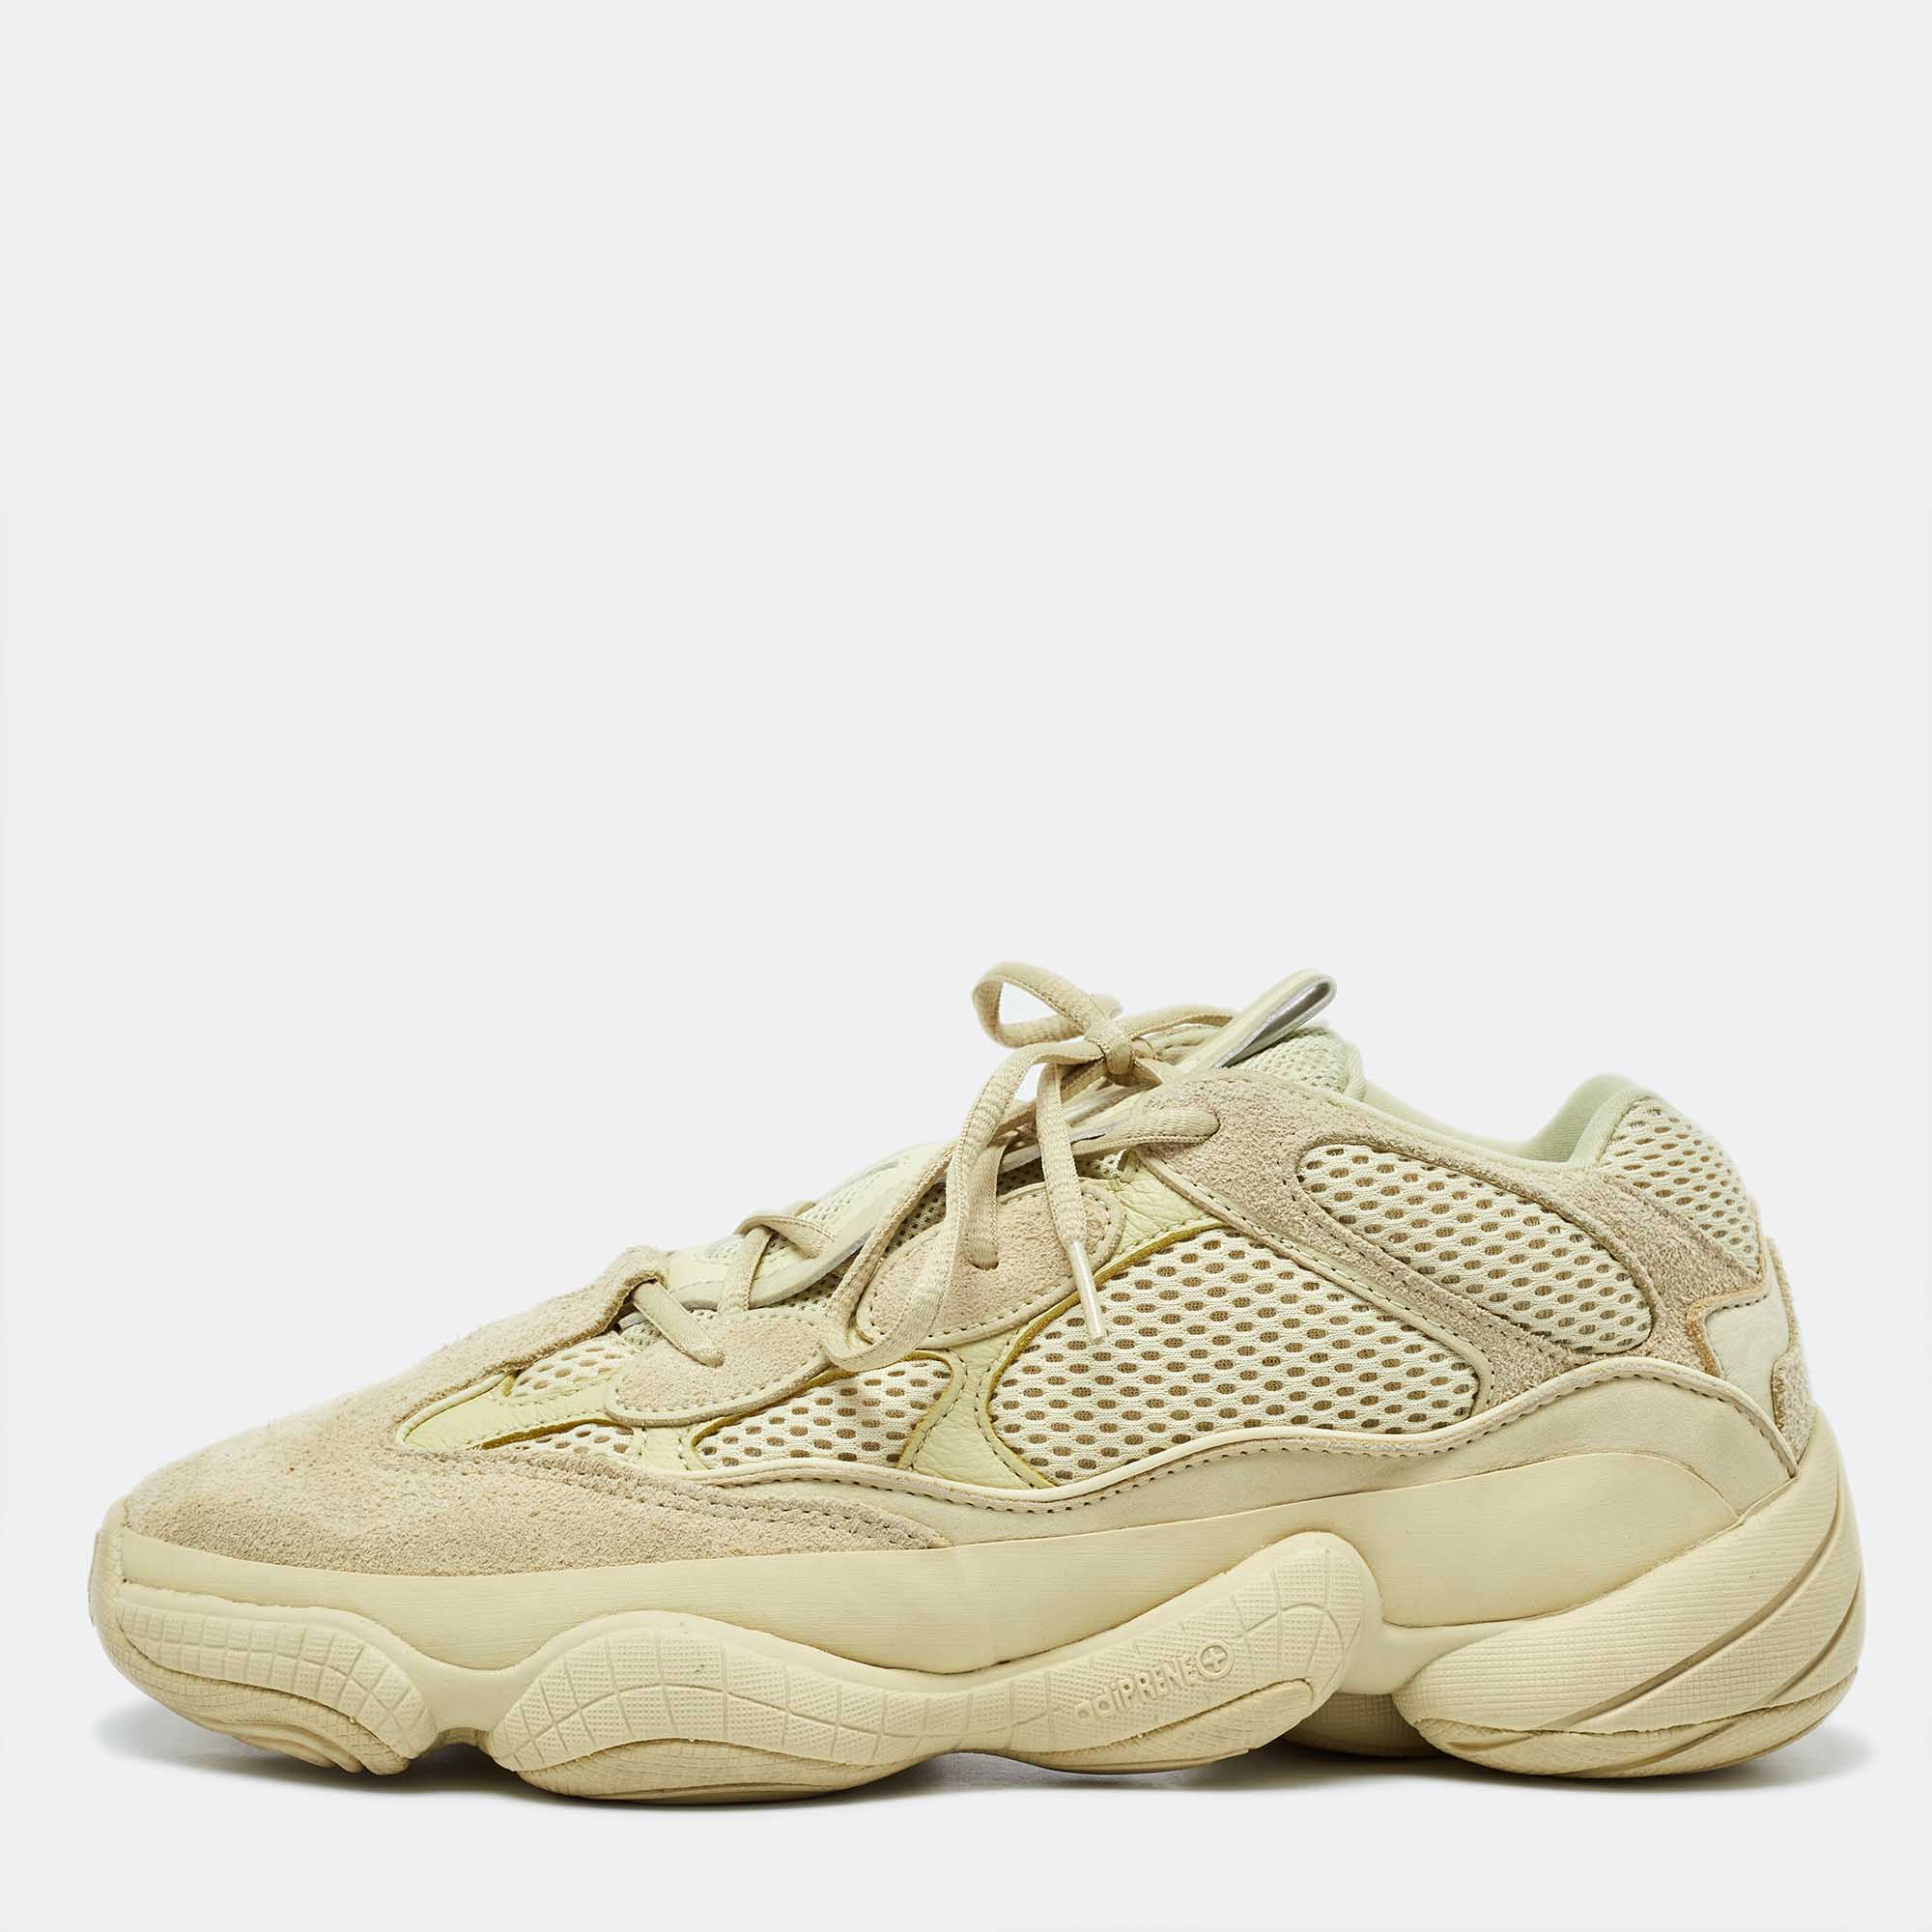 

Yeezy x Adidas Light Yellow Suede and Mesh Yeezy 500 Low Top Sneakers Size 45.5, Grey